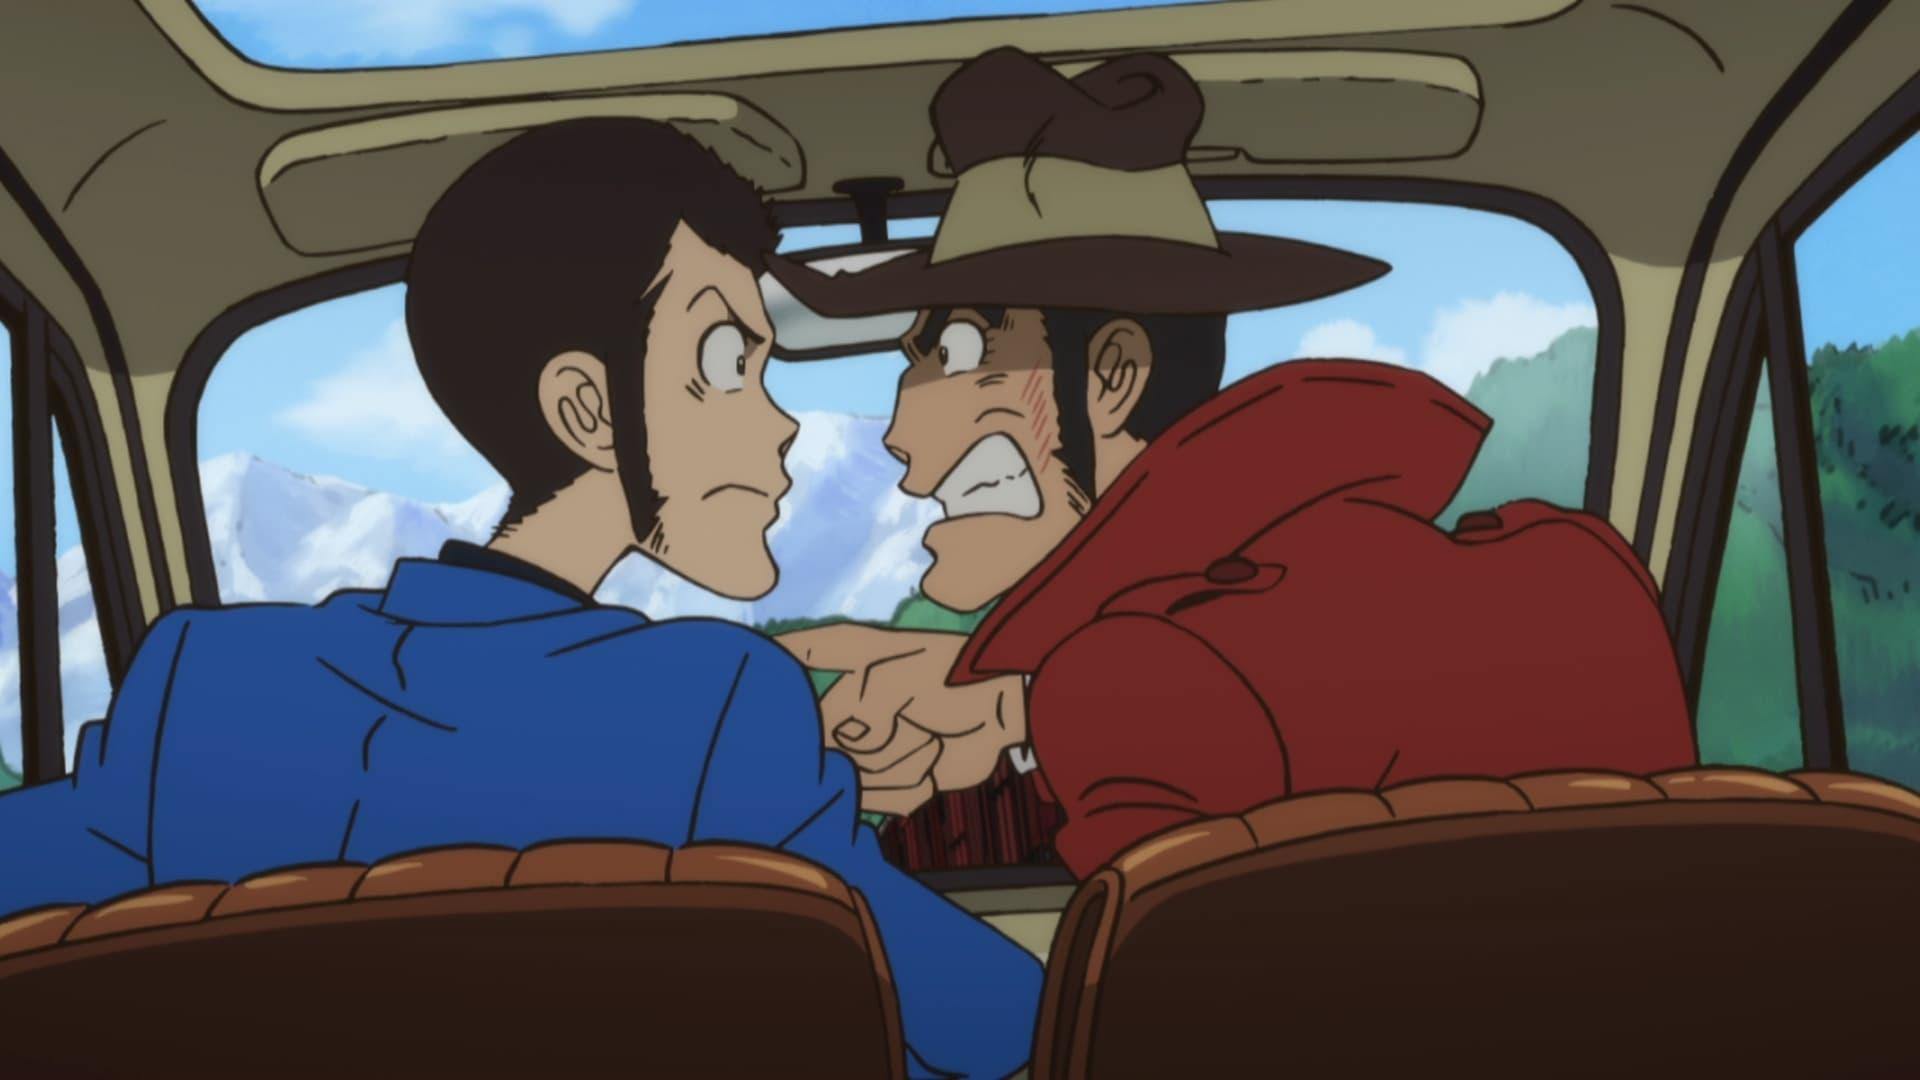 Lupin the Third: Non-Stop Rendezvous backdrop